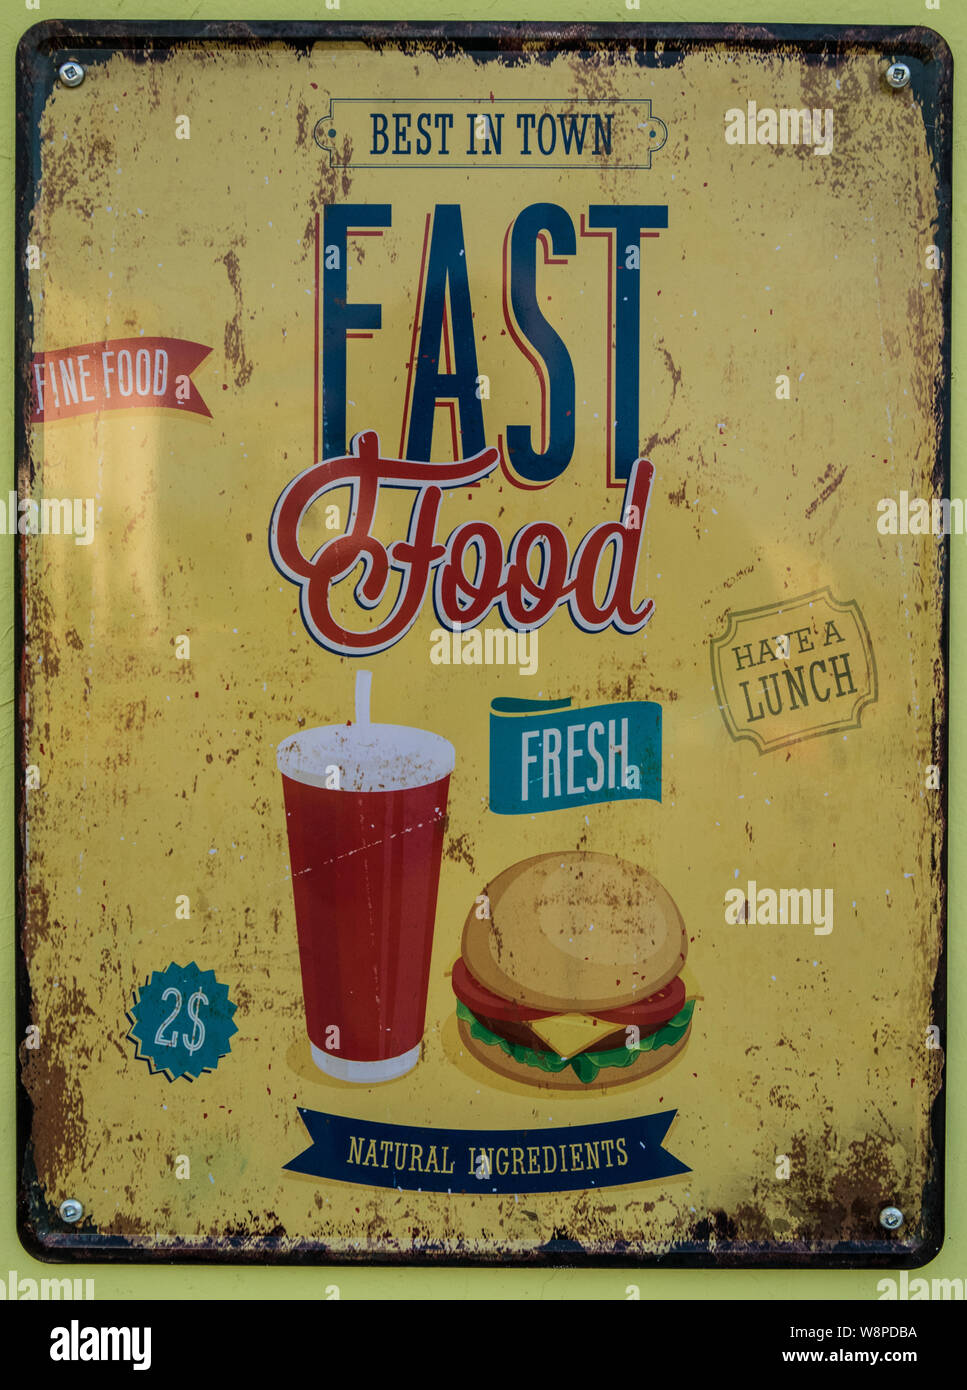 A vintage sign advertising some fast food on a food truck. Stock Photo